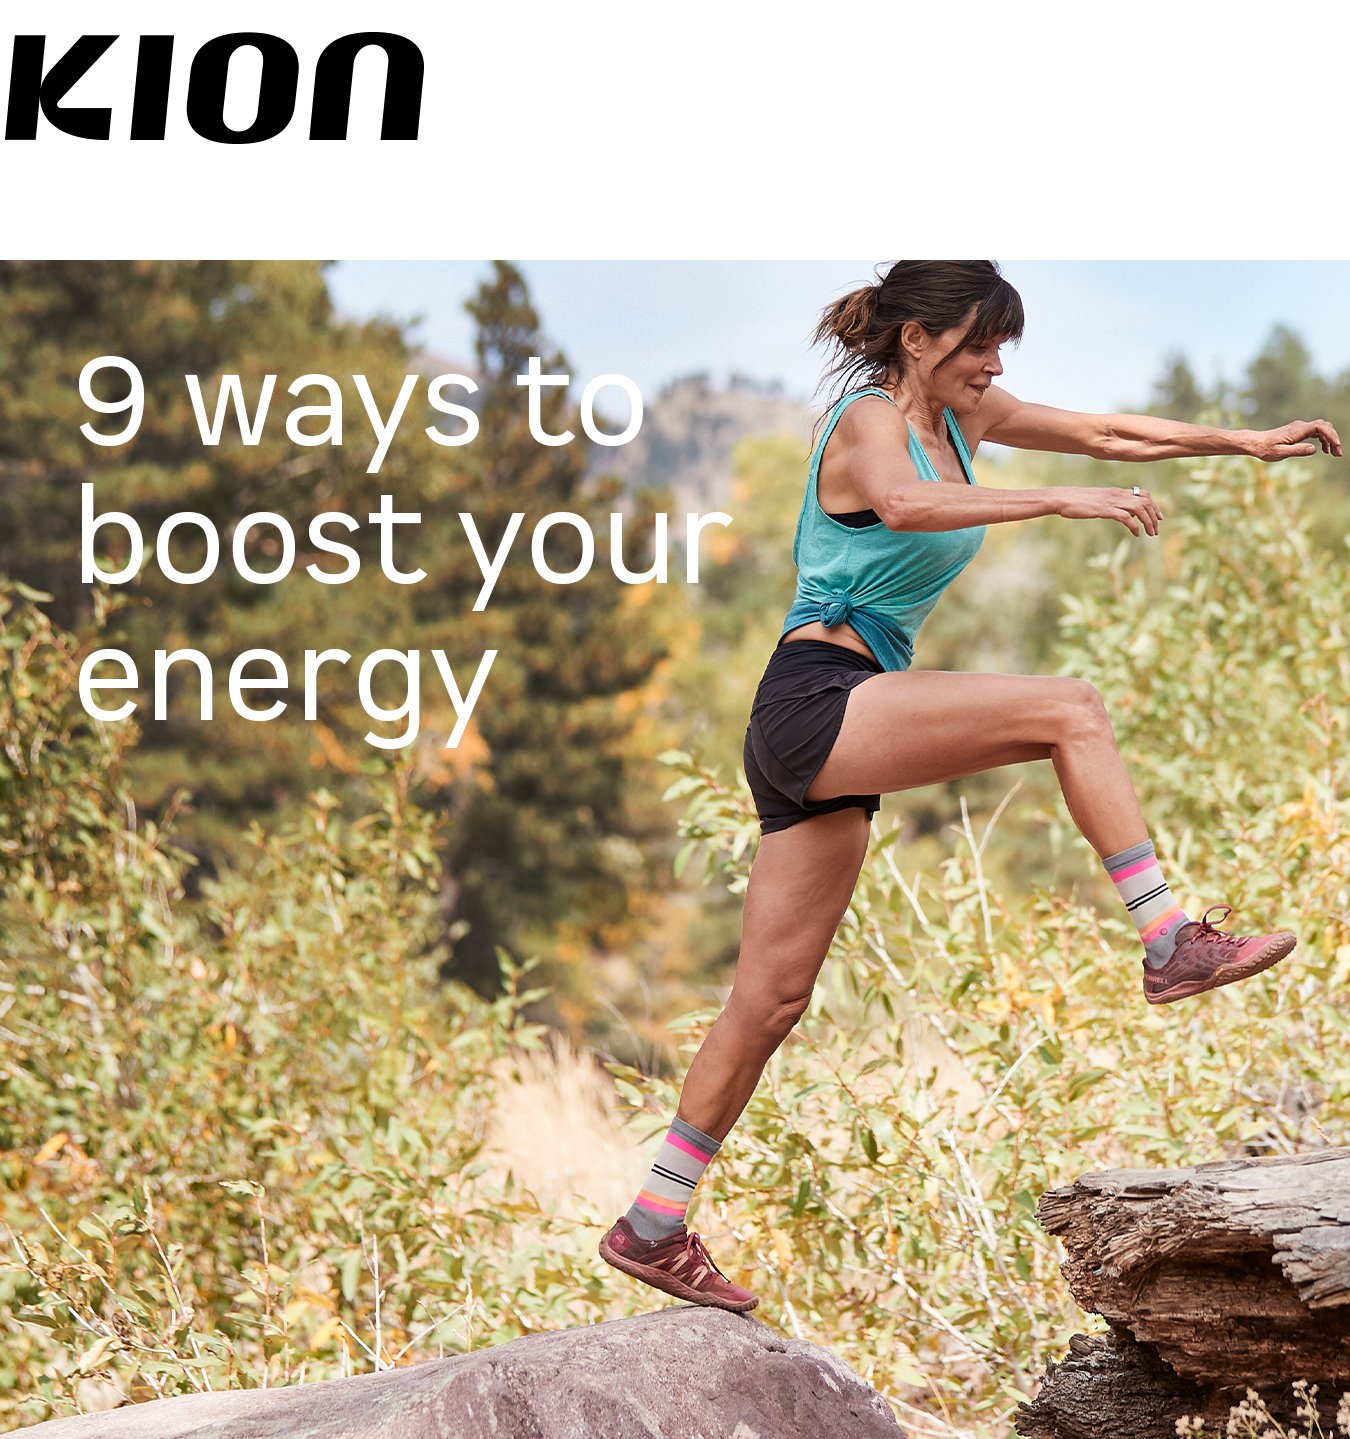 Nine ways to boost your energy